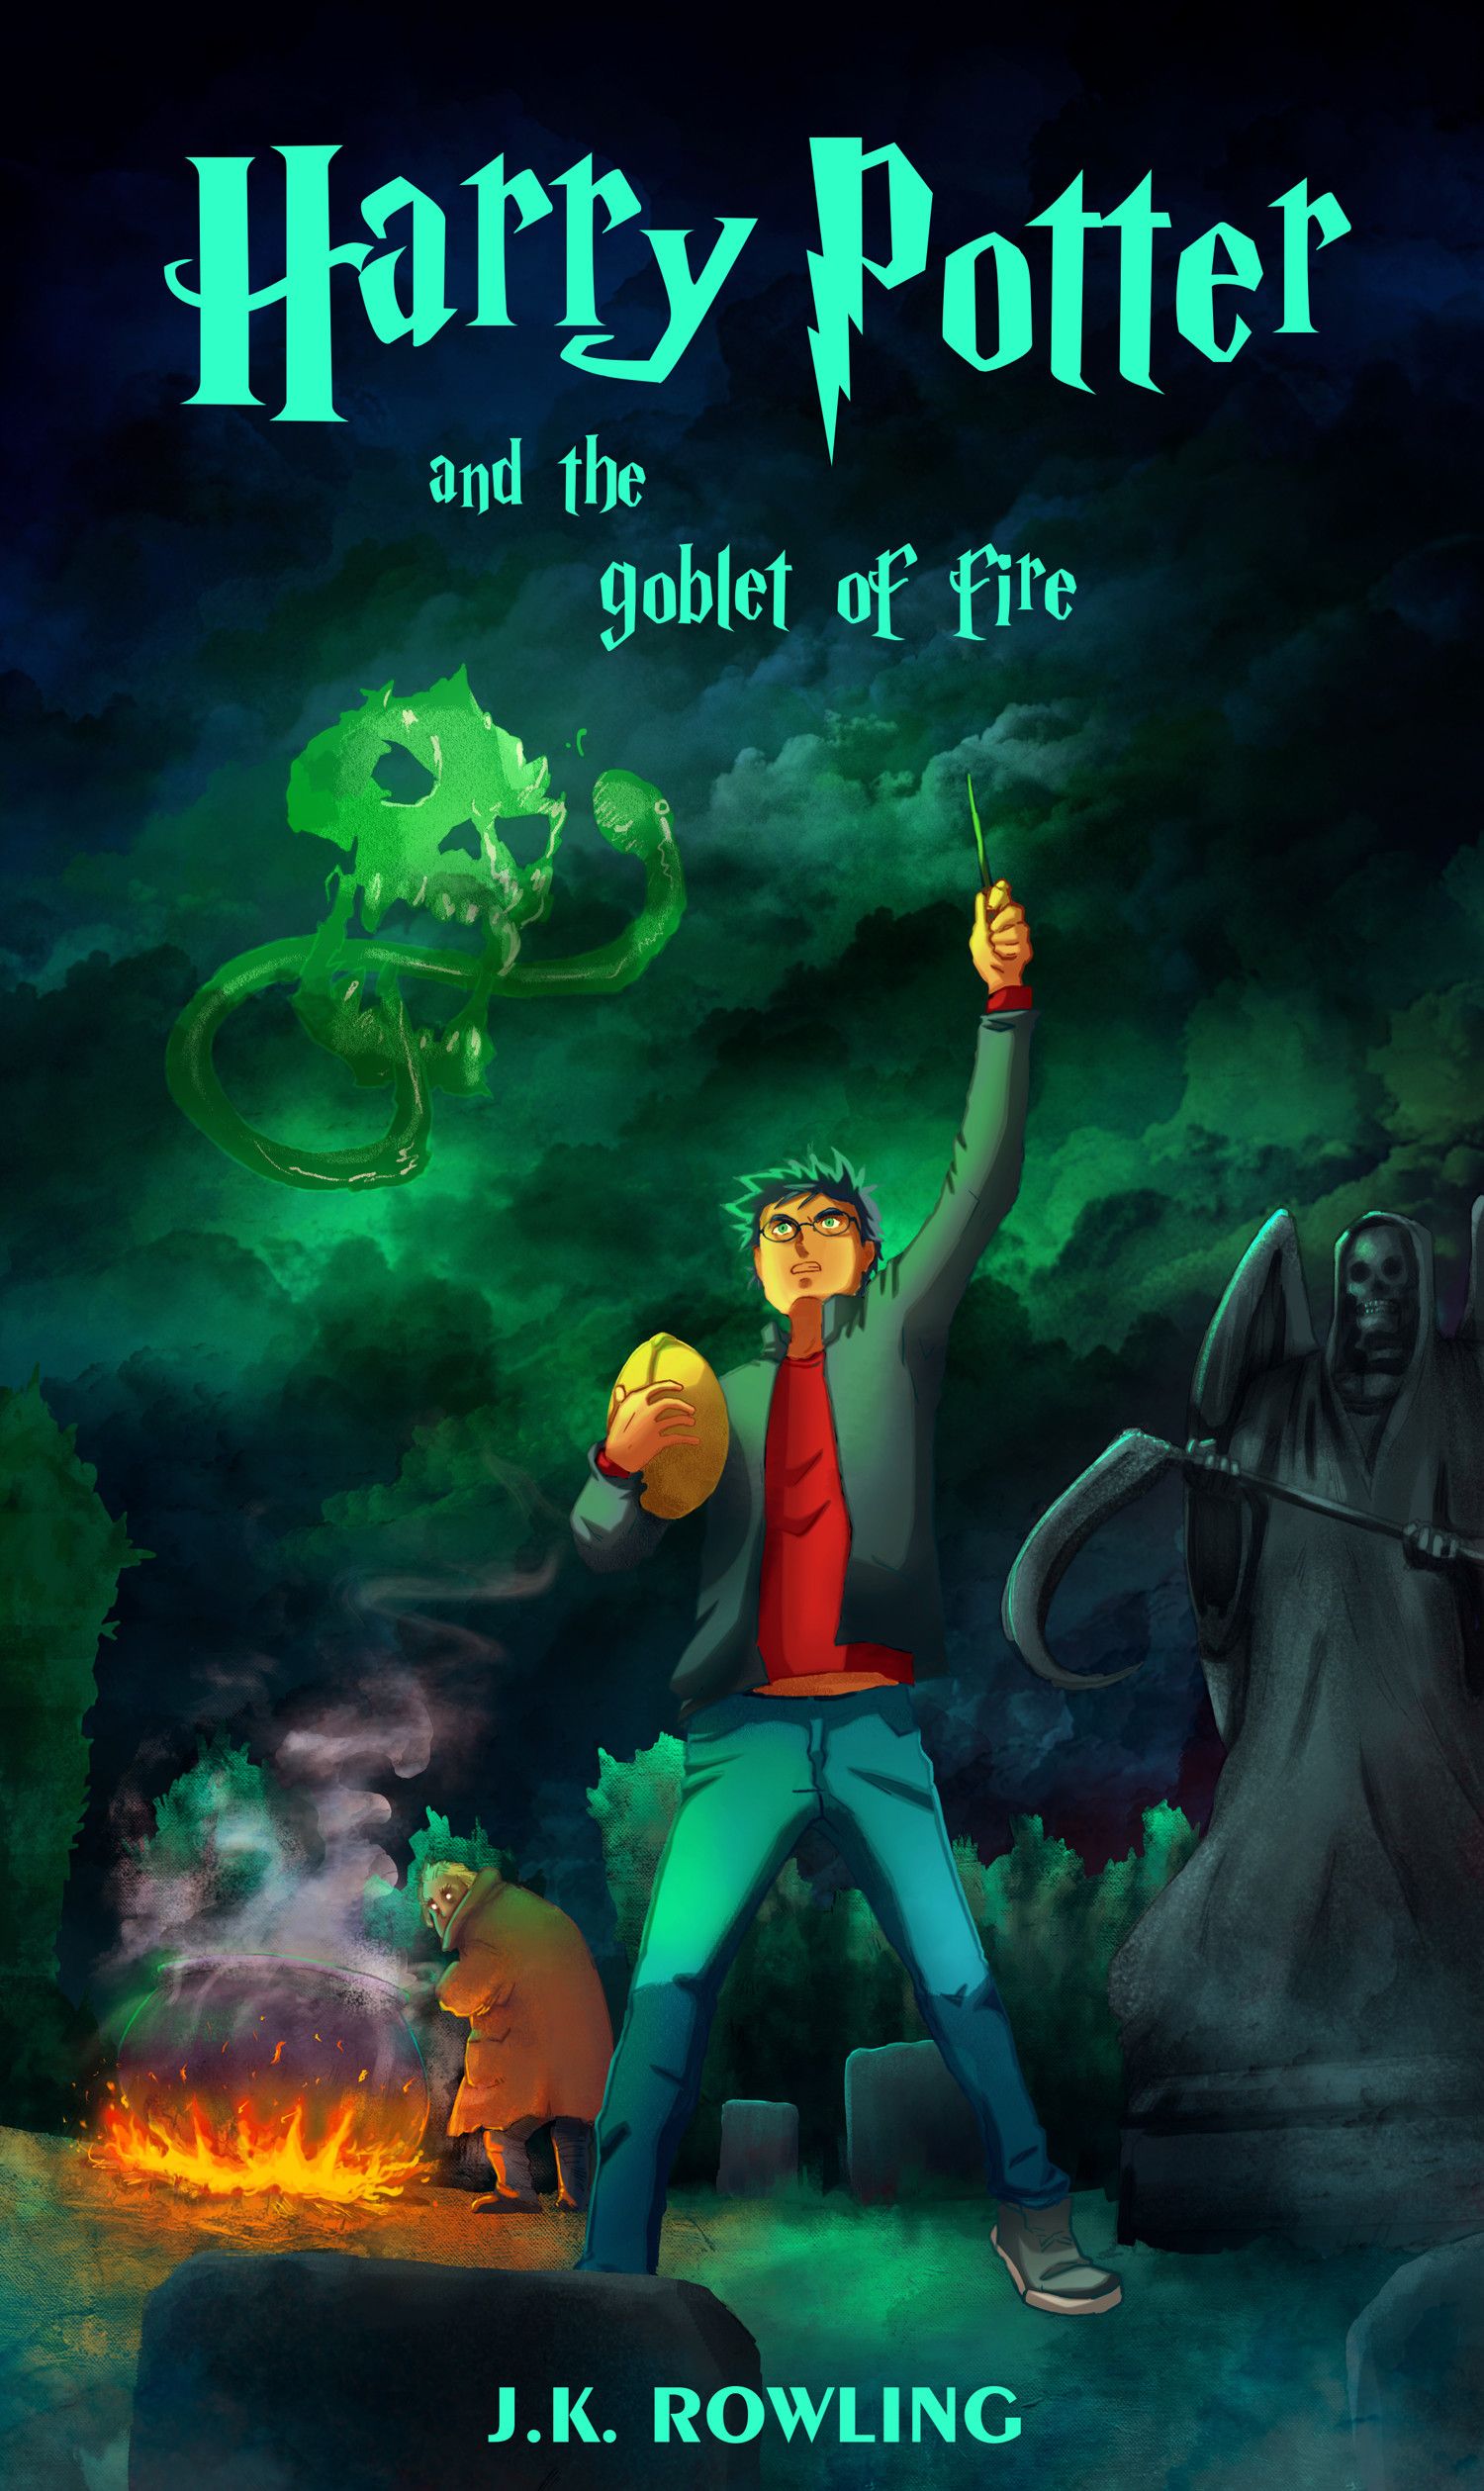 Alan Vilalte Potter and the goblet of fire book cover redesign